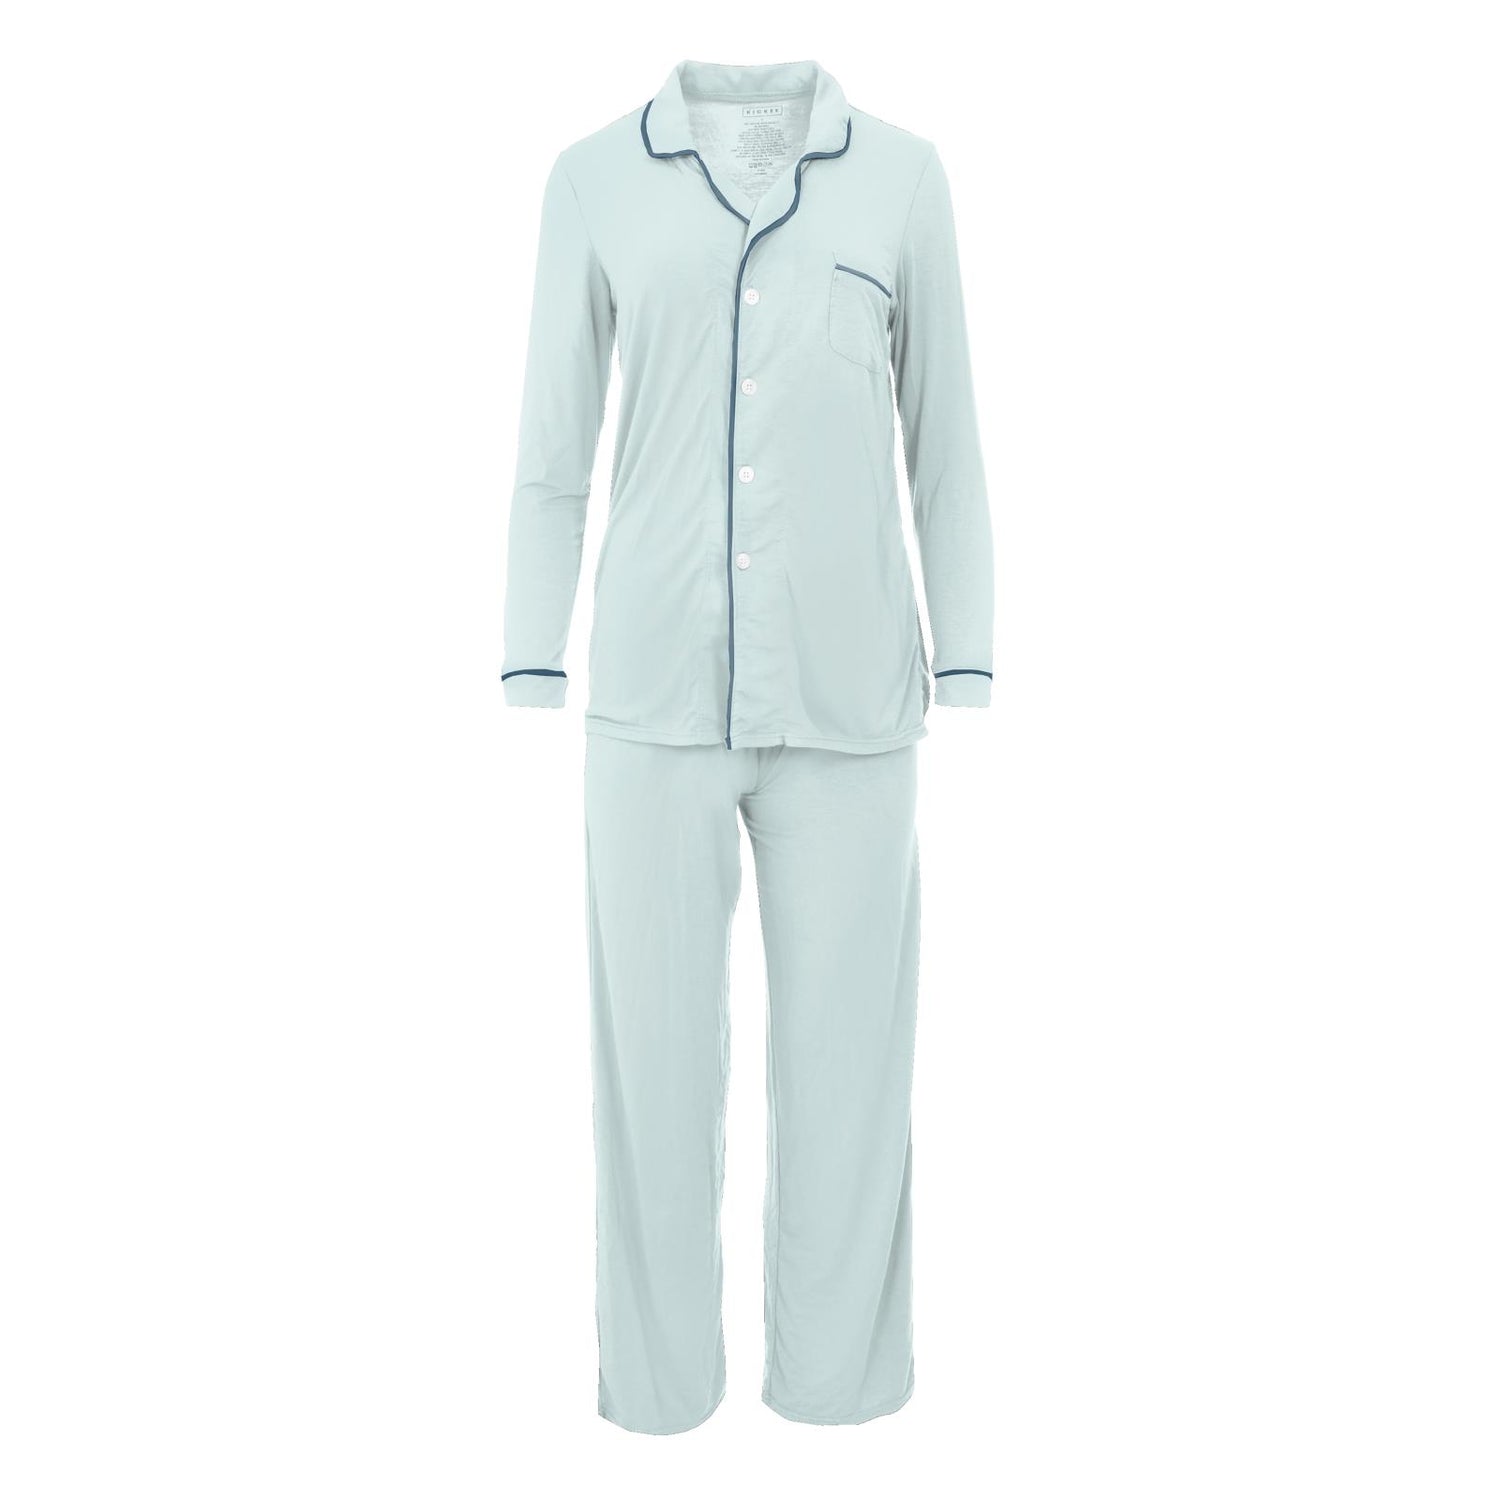 Women's Long Sleeved Collared Pajama Set in Fresh Air with Deep Sea